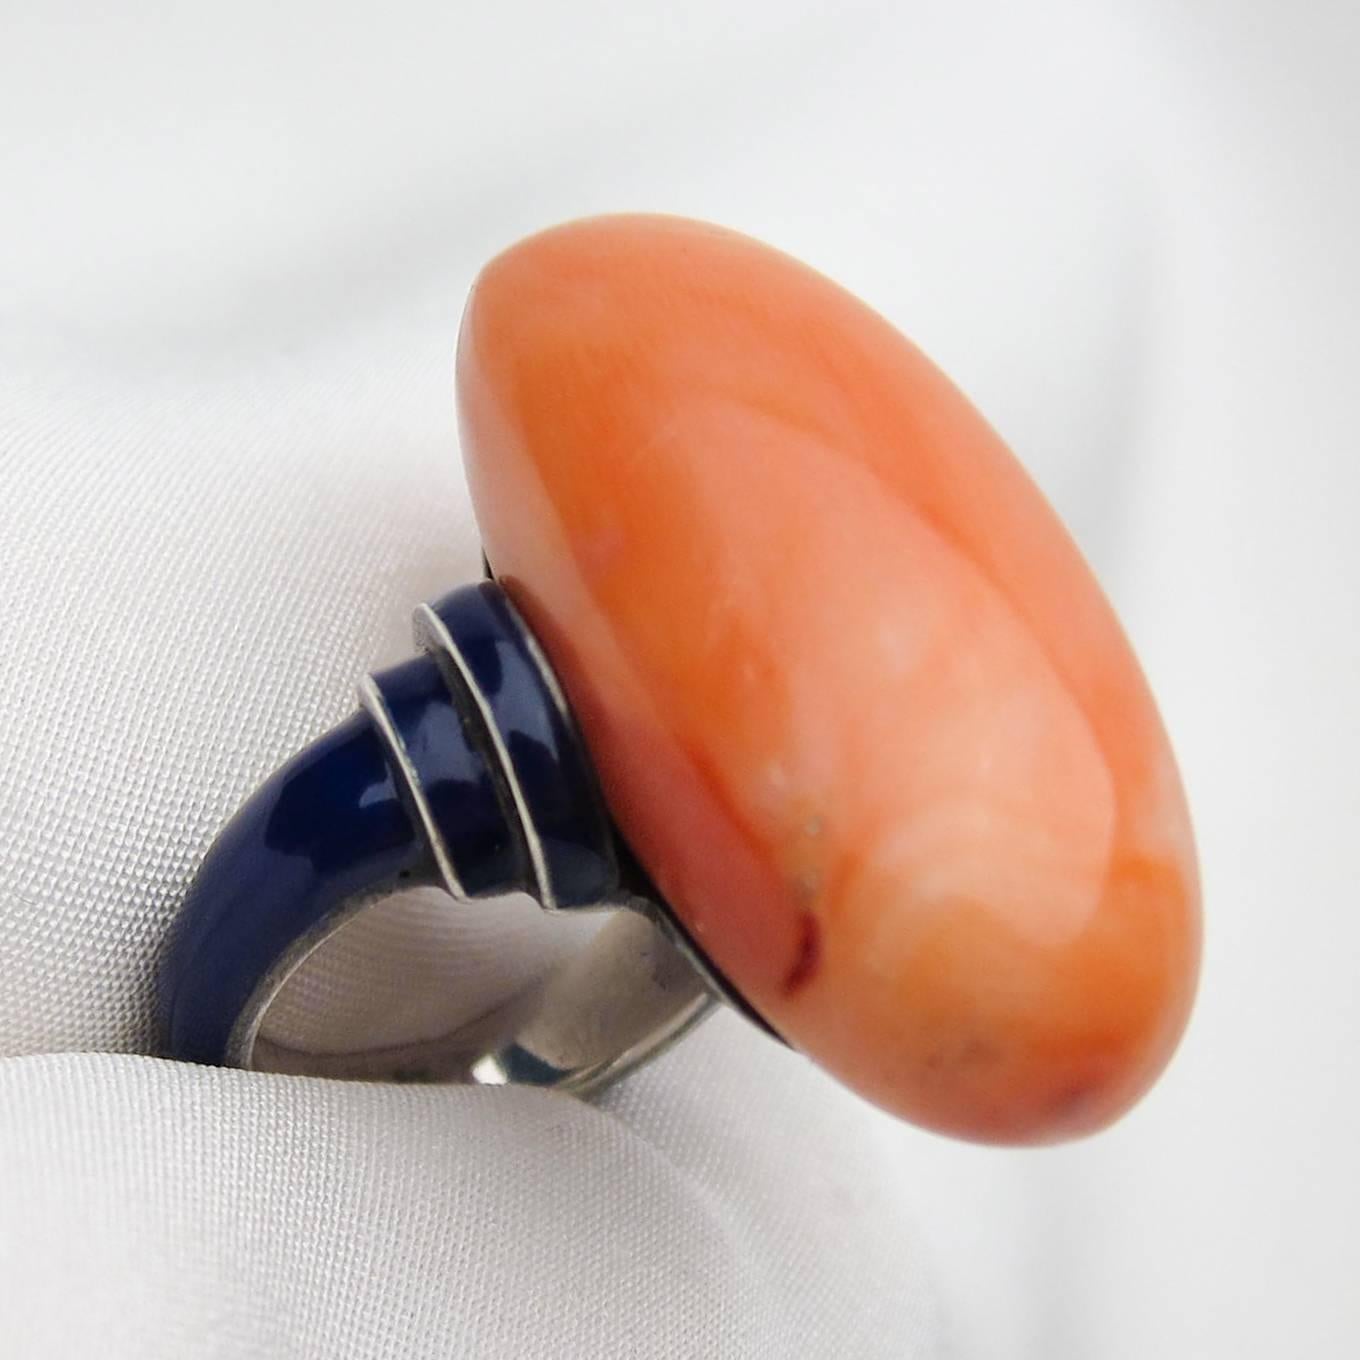 Circa 1910. This fabulous antique cocktail ring features an astounding 85 carat, oval cabochon-cut orange coral stone accented by a deep-blue enamel and silver setting. This handmade ring is a crazy cool statement piece!!